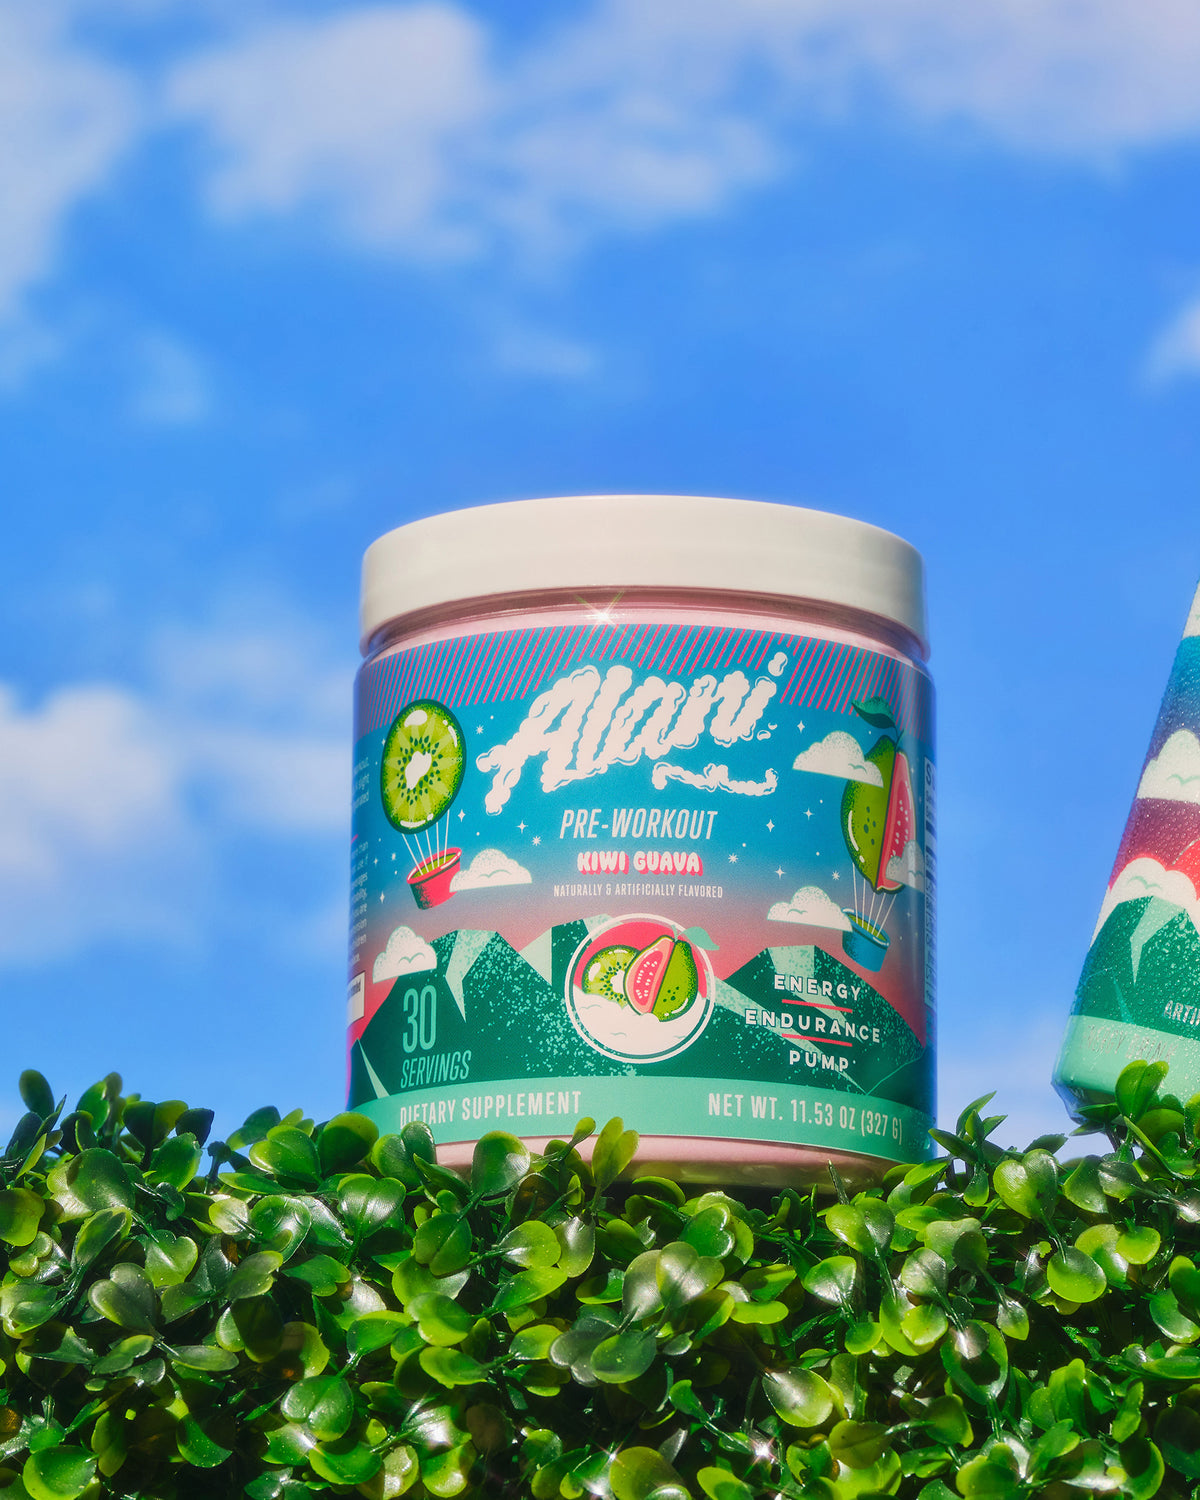 A container of Alani Nu Pre- Workout Kiwi Guava sitting on top of a bush.